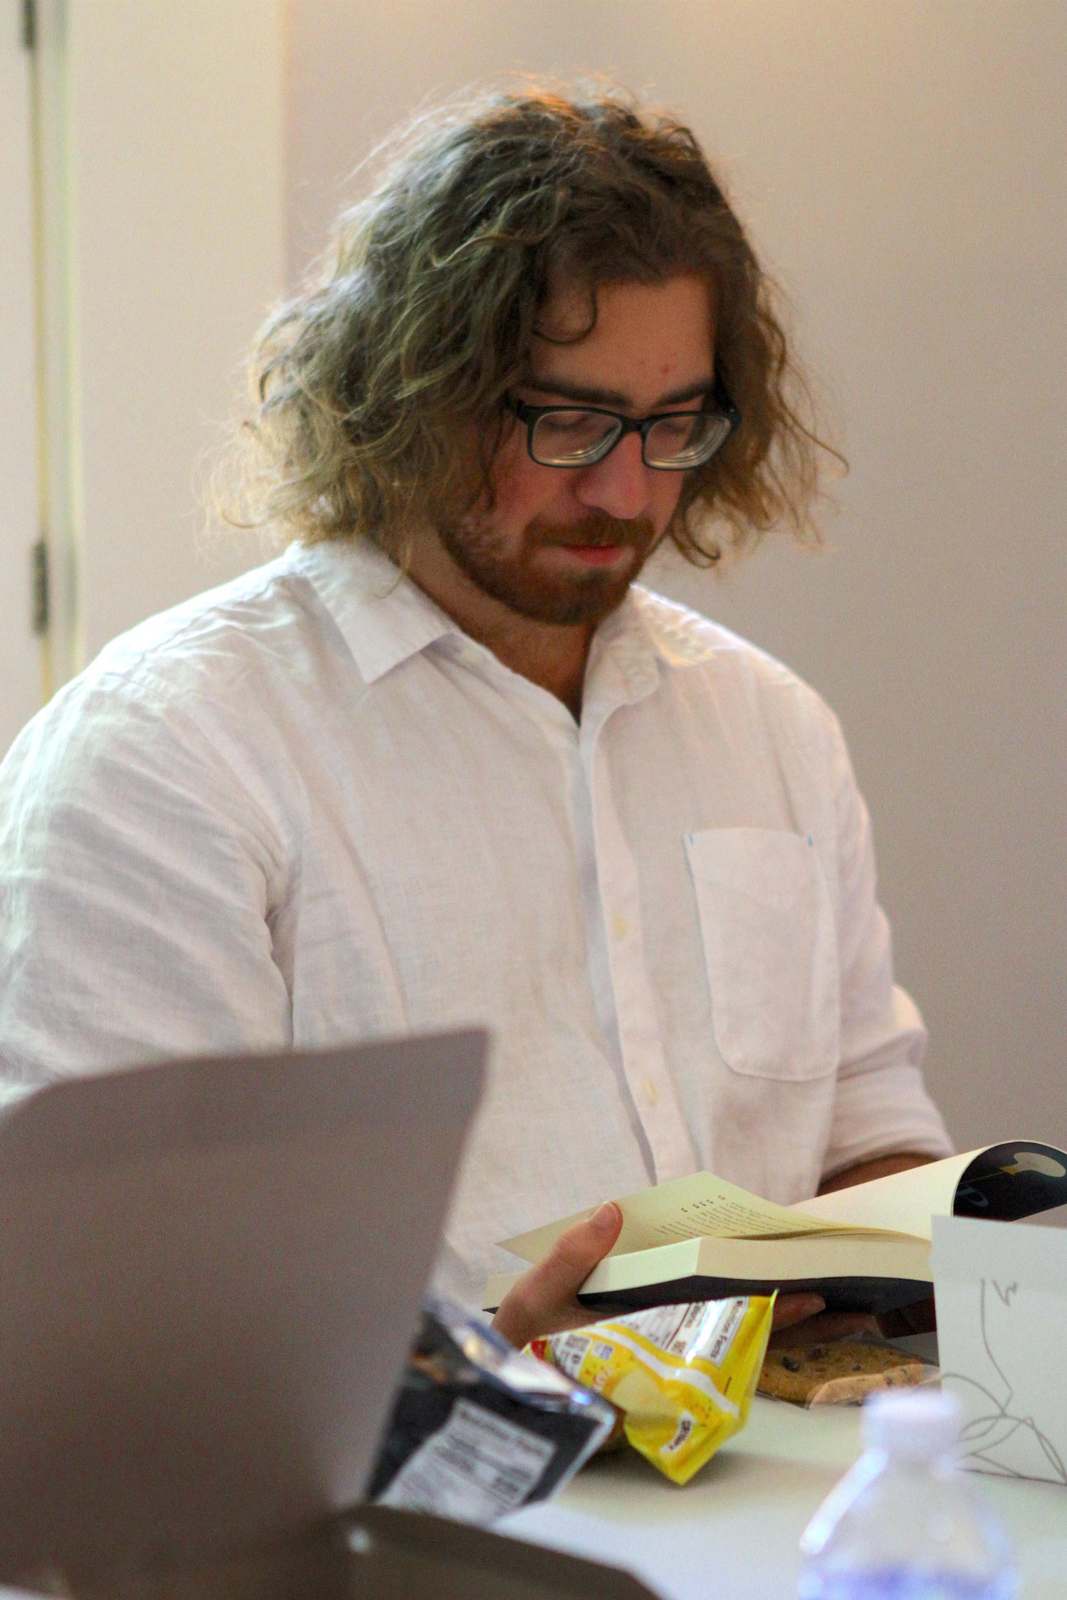 a man with long hair and glasses reading a book